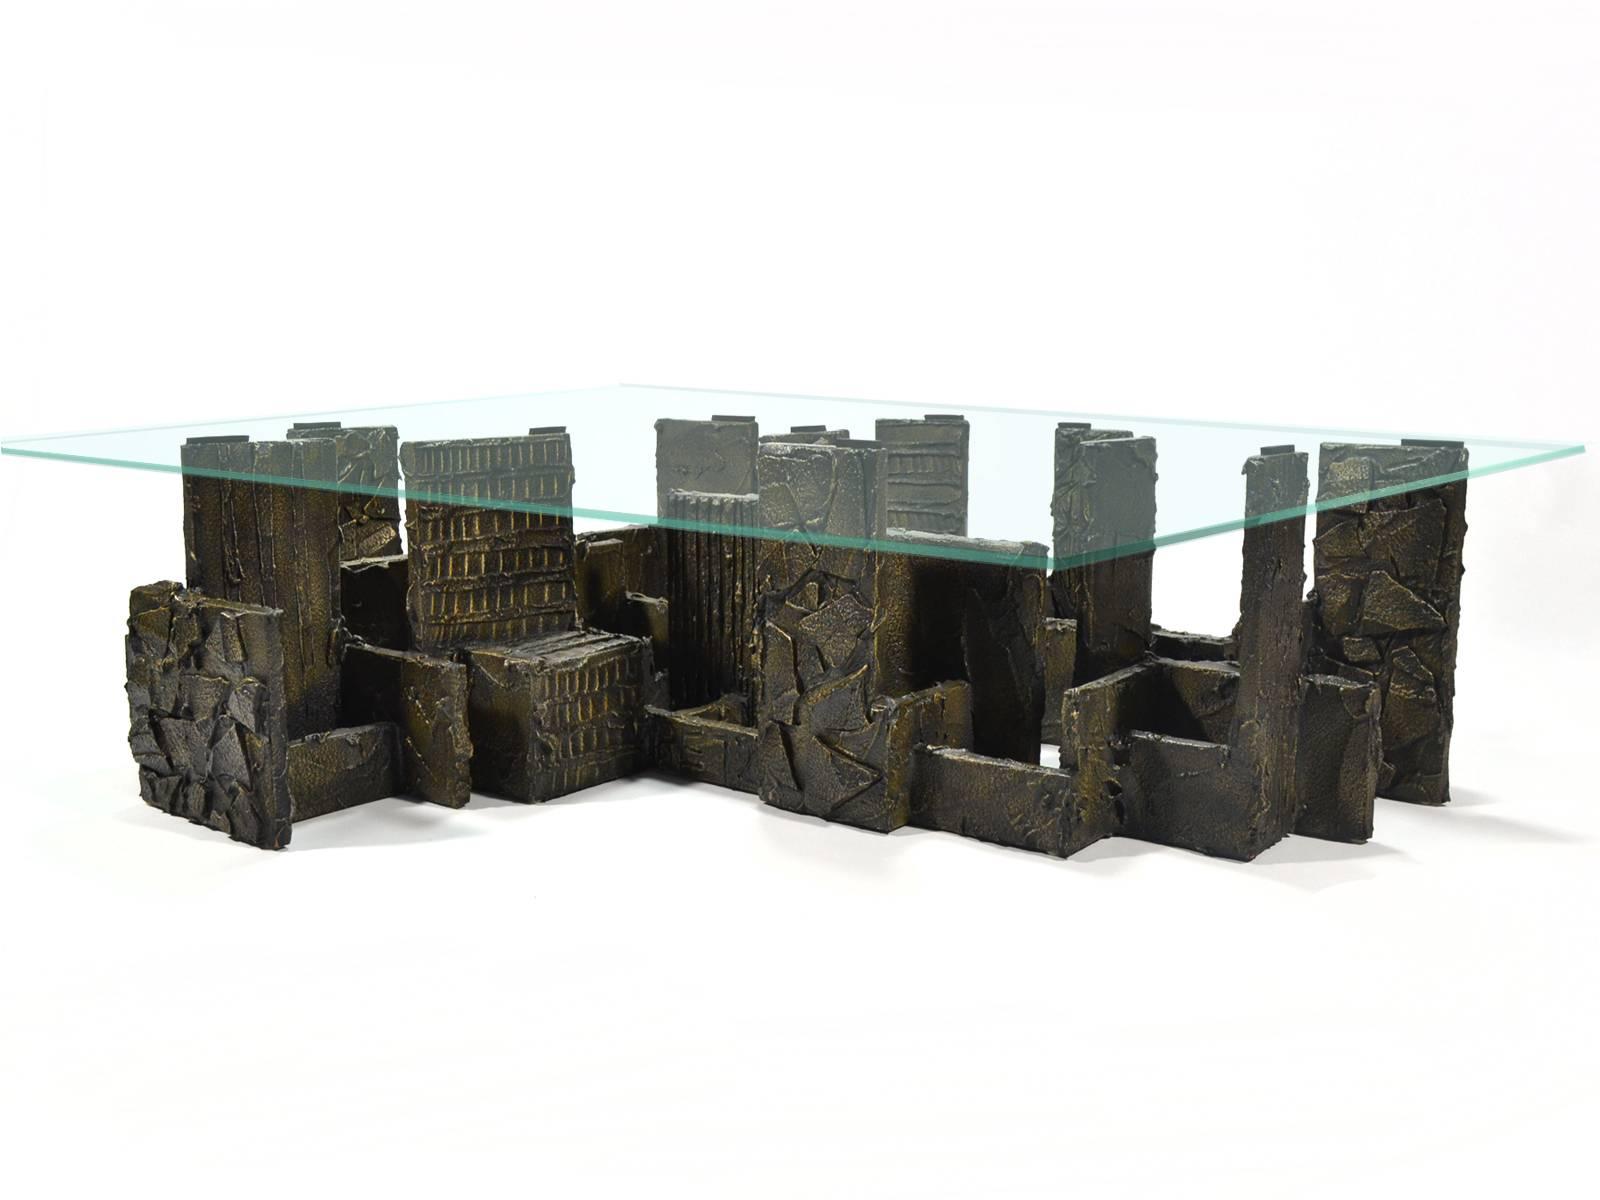 This exceptional coffee table by Paul Evans was a custom order and is the largest we've ever seen of his sculpted bronze series. The architectural base, an arrangement of heavily textured slabs in a beautiful composition, reminds us of a city